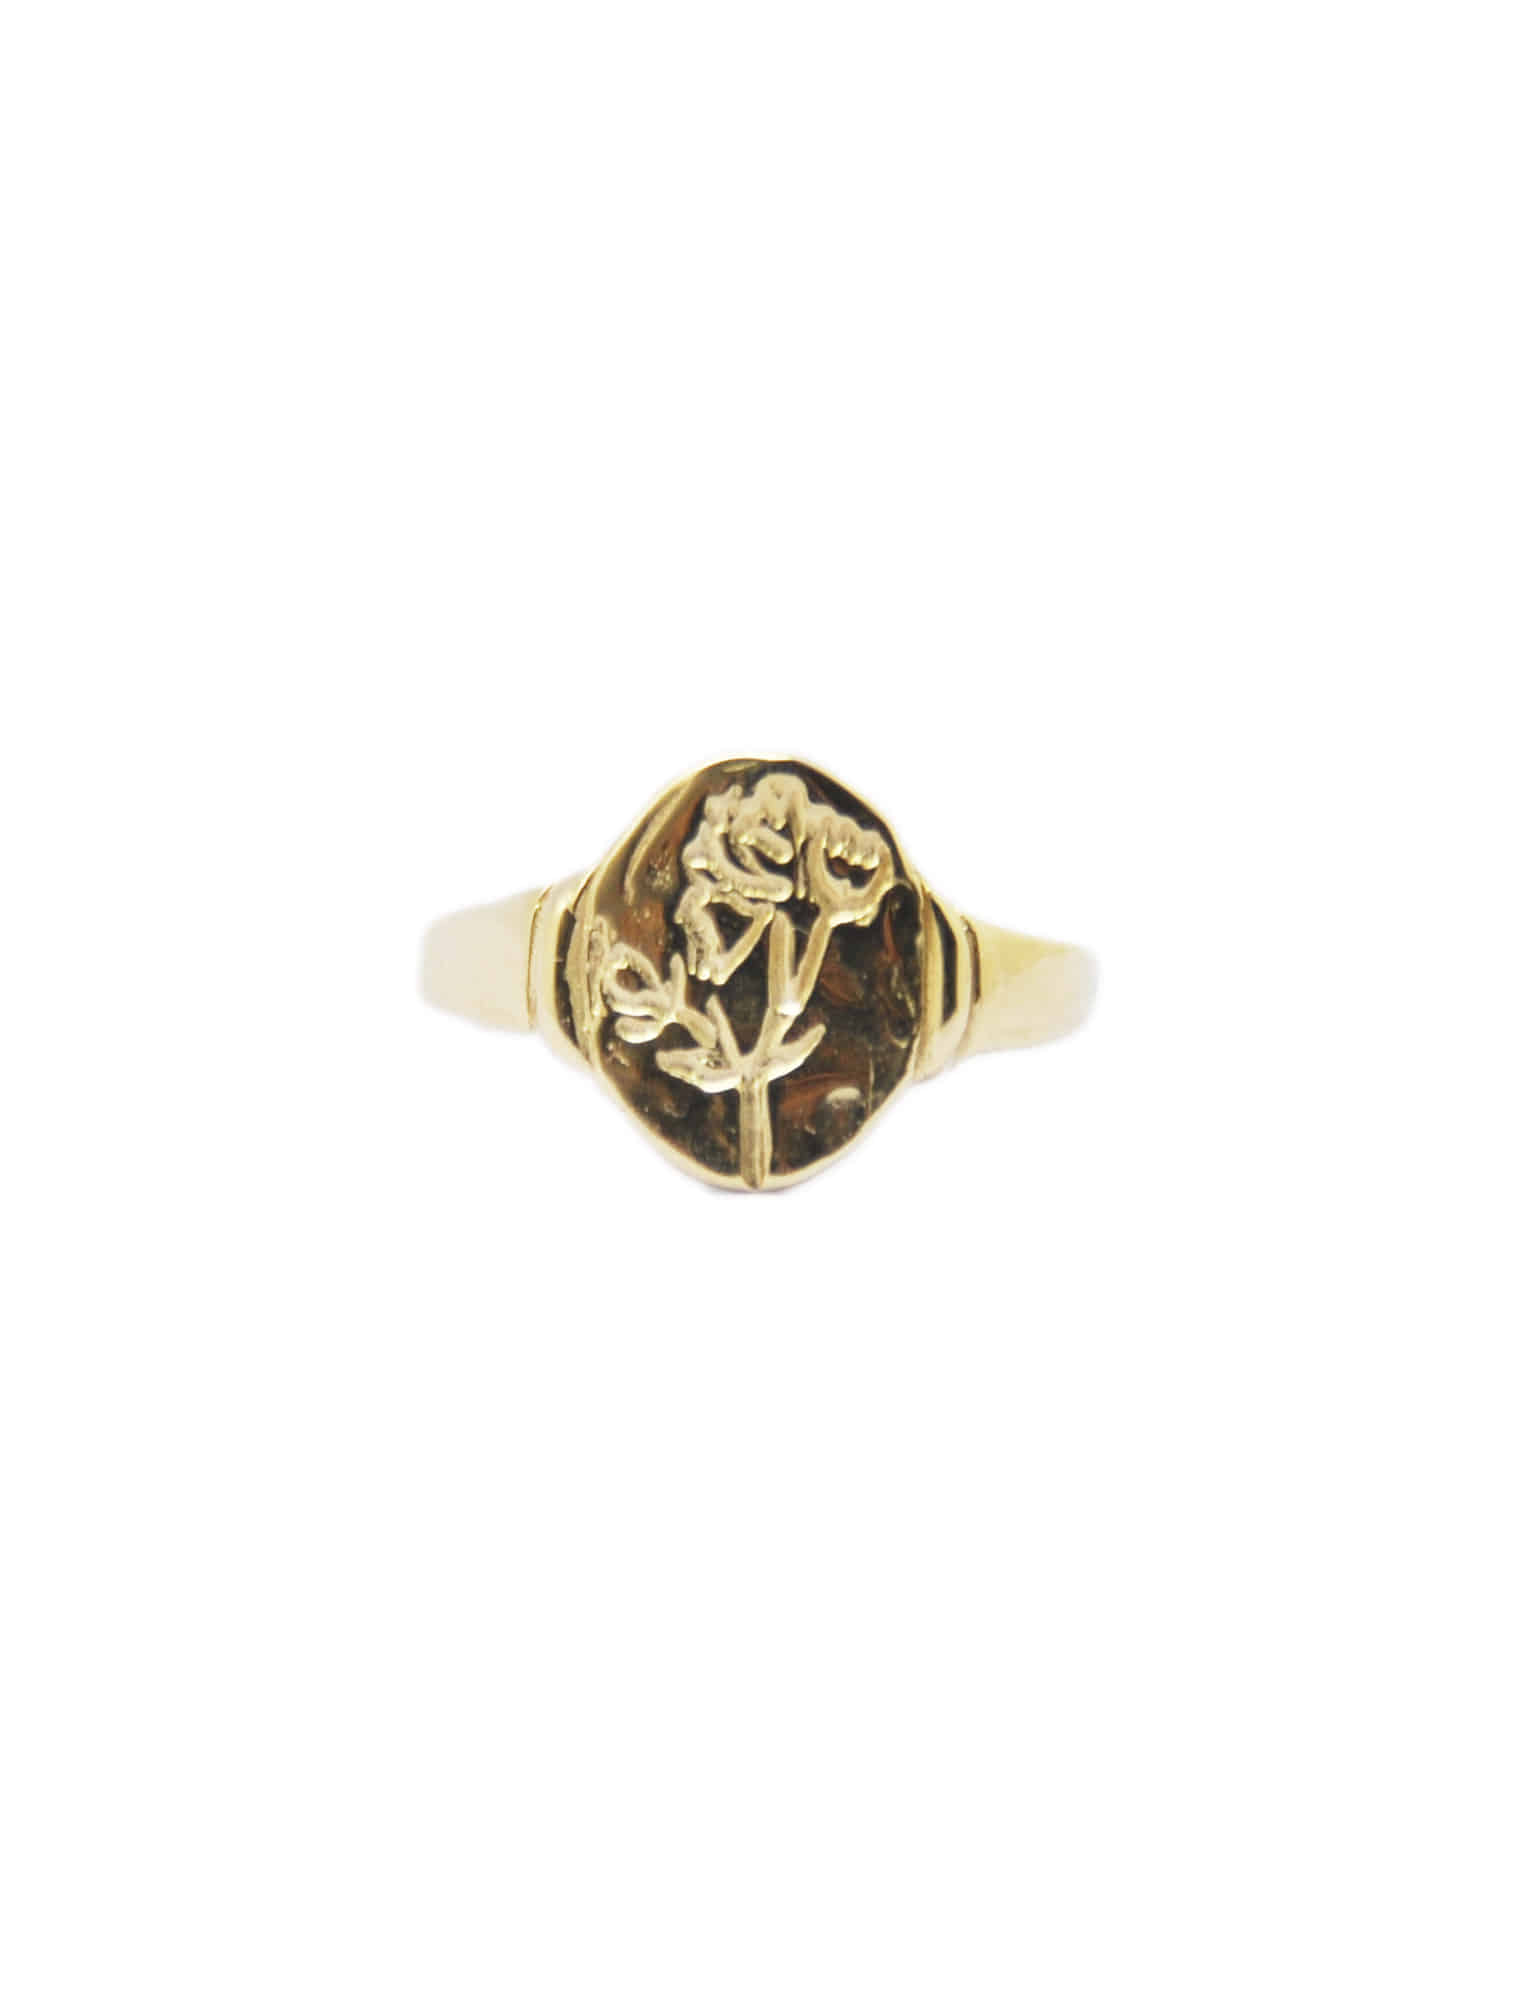 [14k gold] Thank You Ring